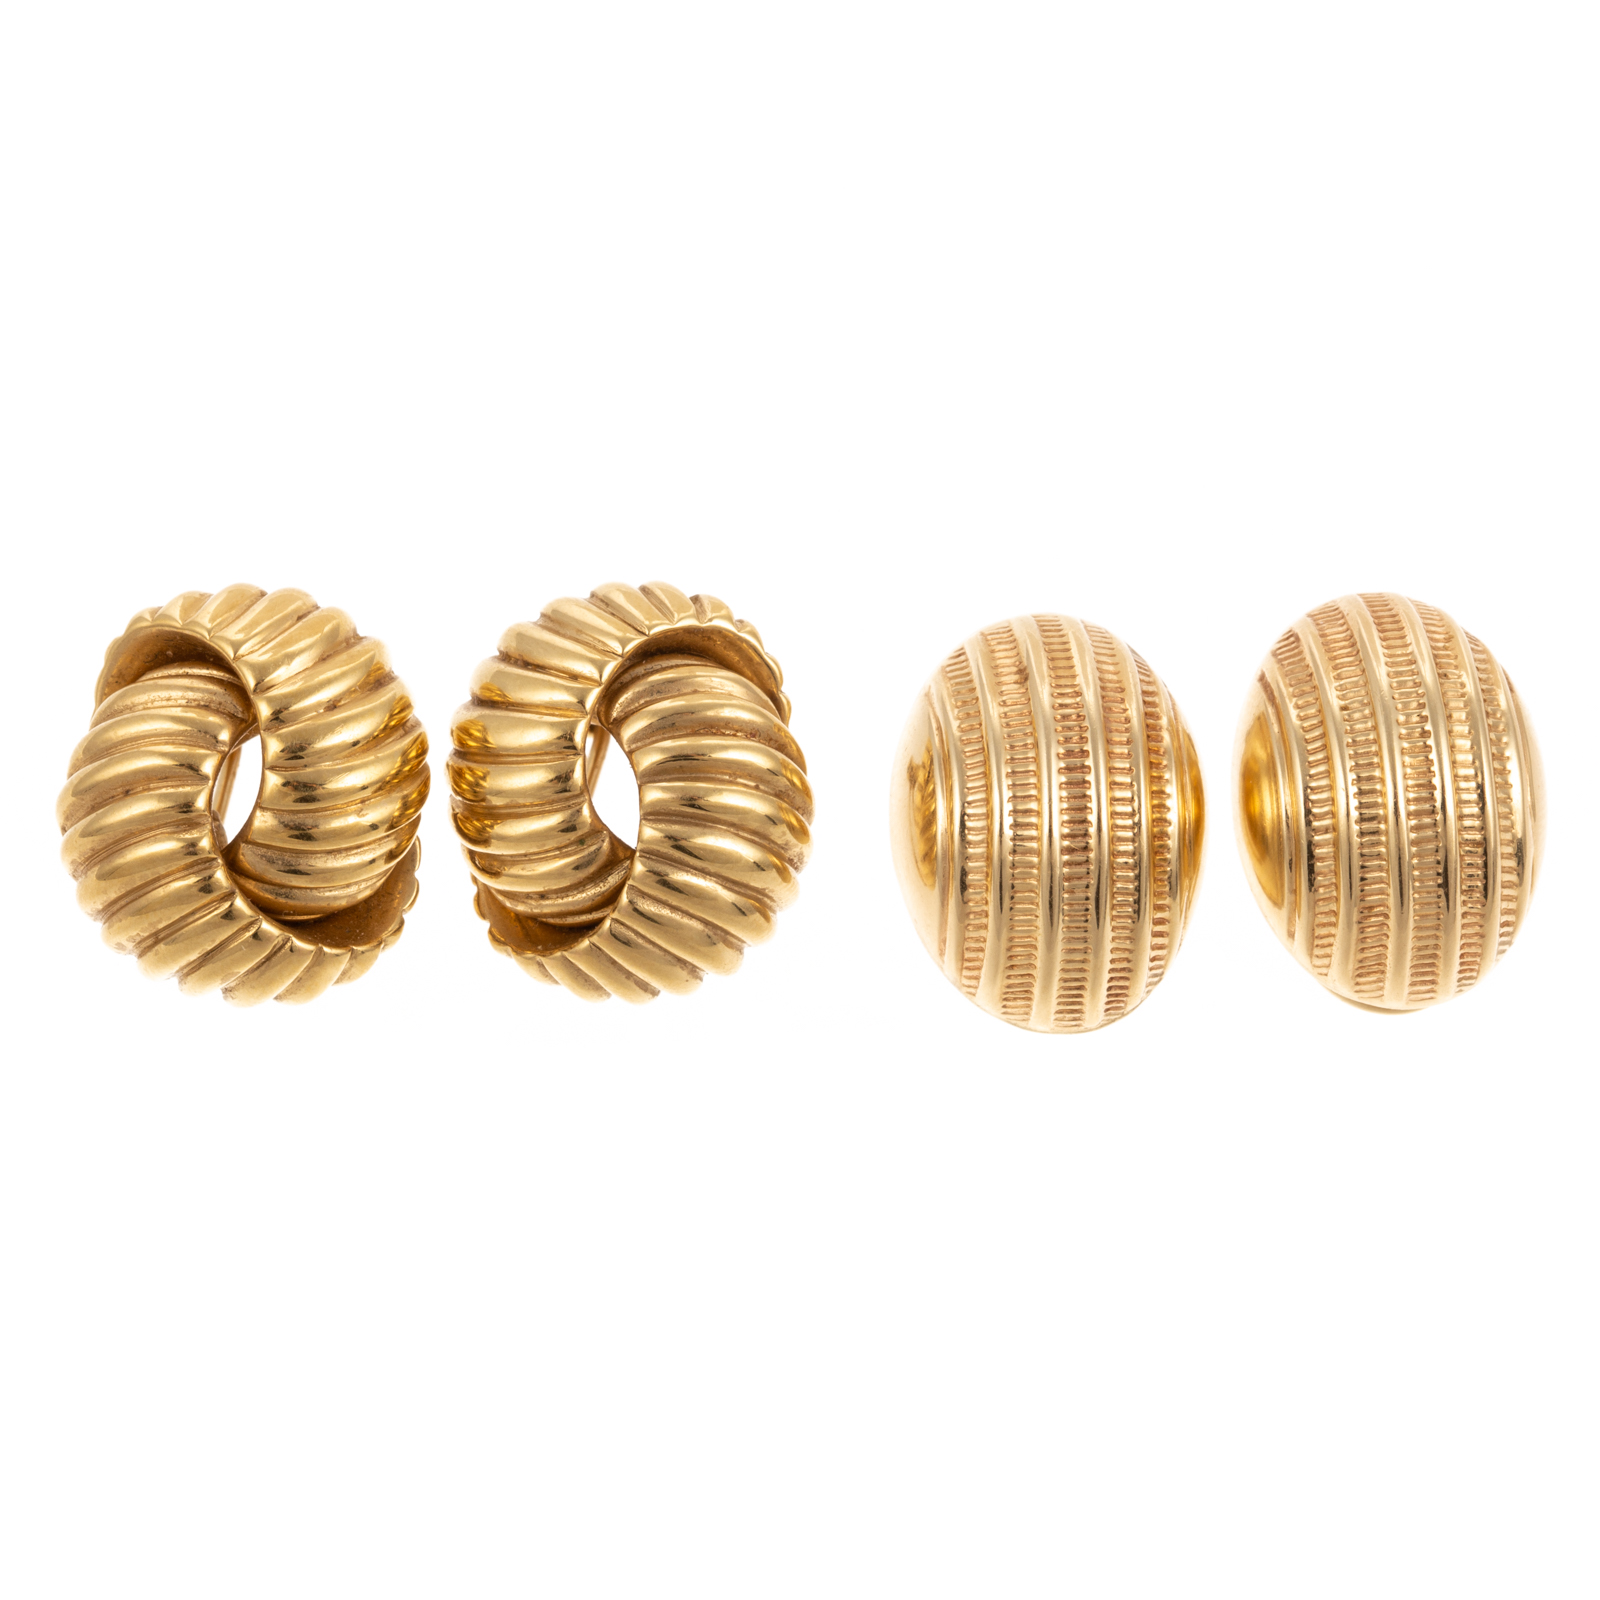 TWO PAIRS OF 14K YELLOW GOLD EAR 2ead92